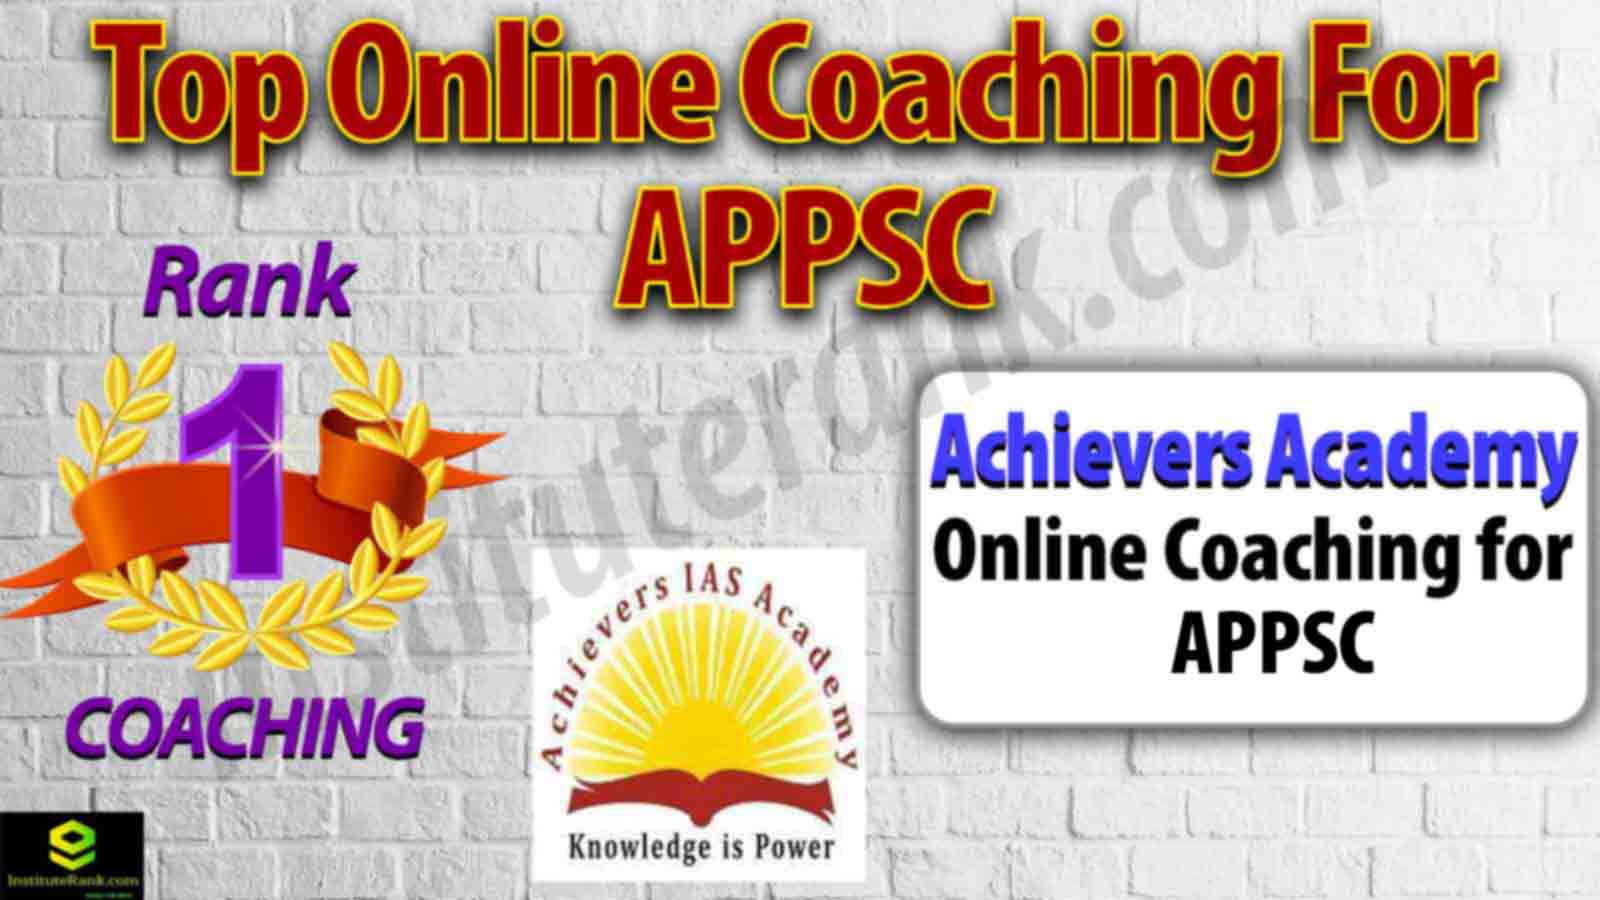 Best Online Coaching For APPSC Examination